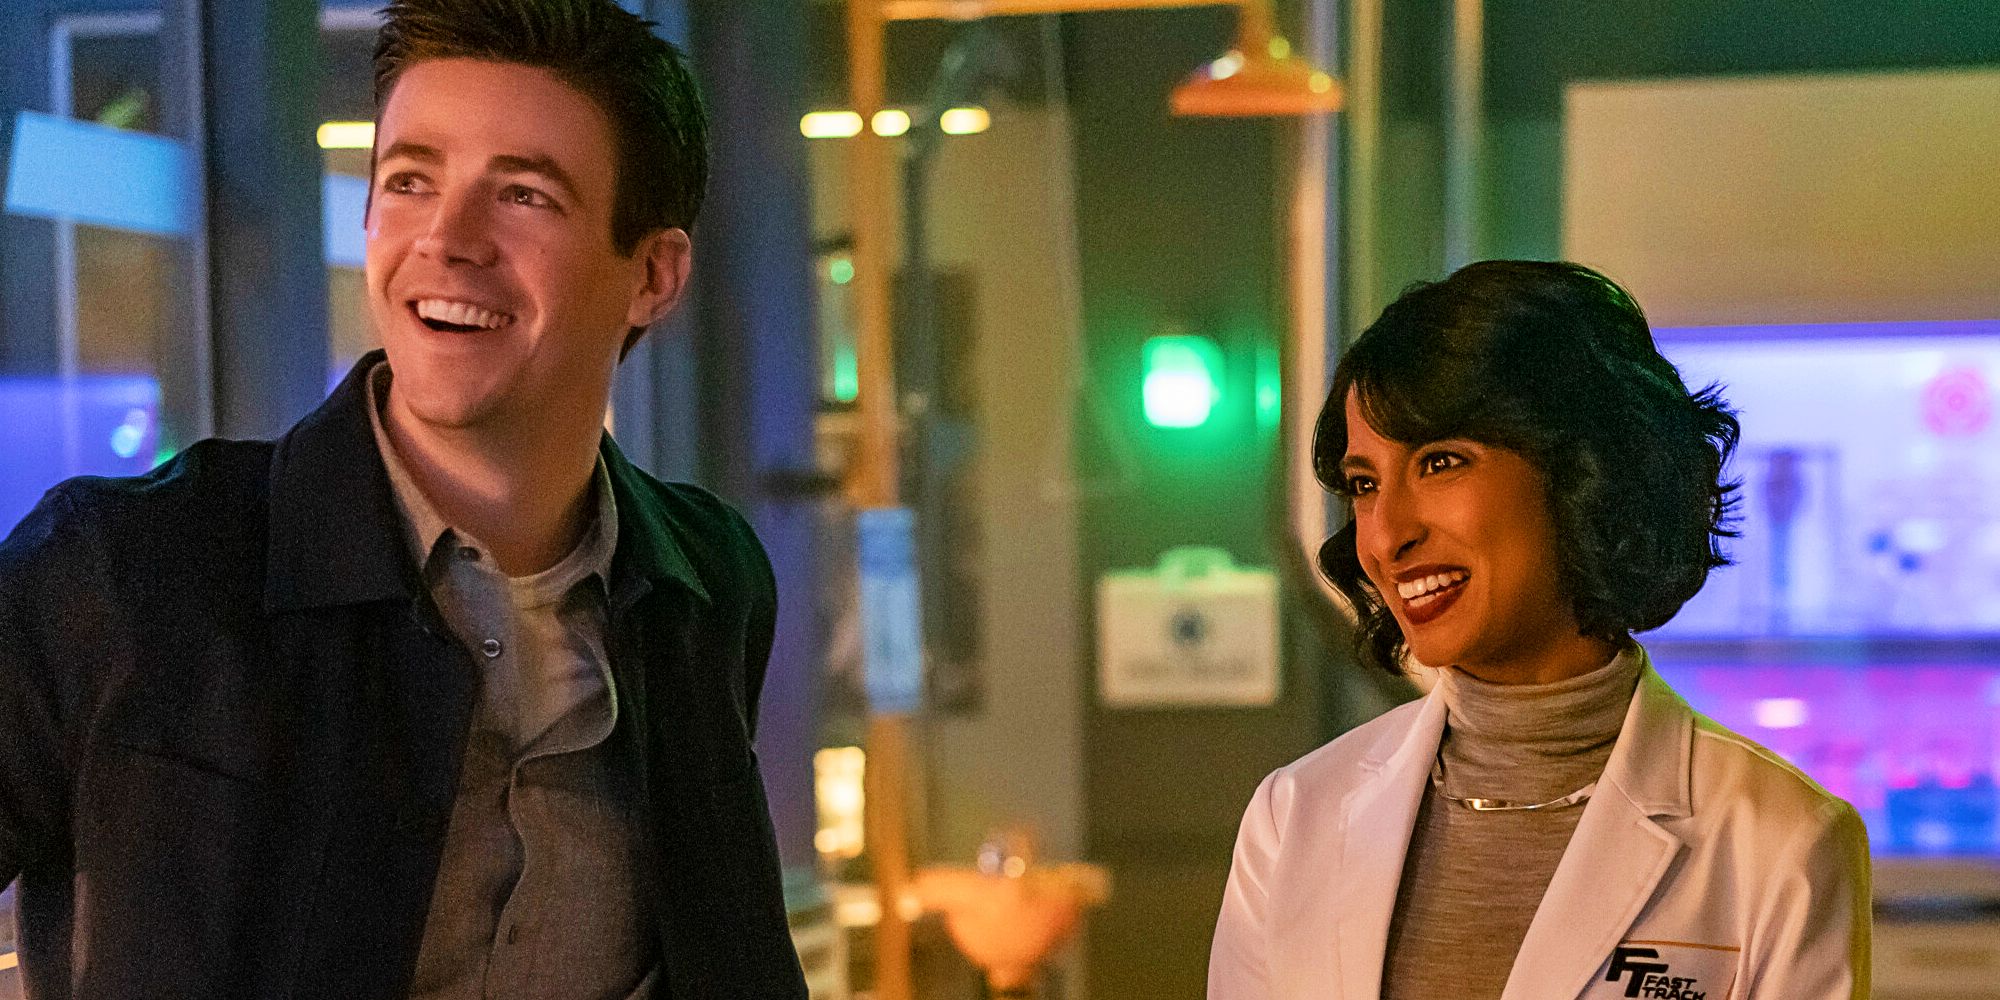 The Flash Grant Gustin as Barry Allen and Kausar Mohammed as Meena Dhawan smiling in lab